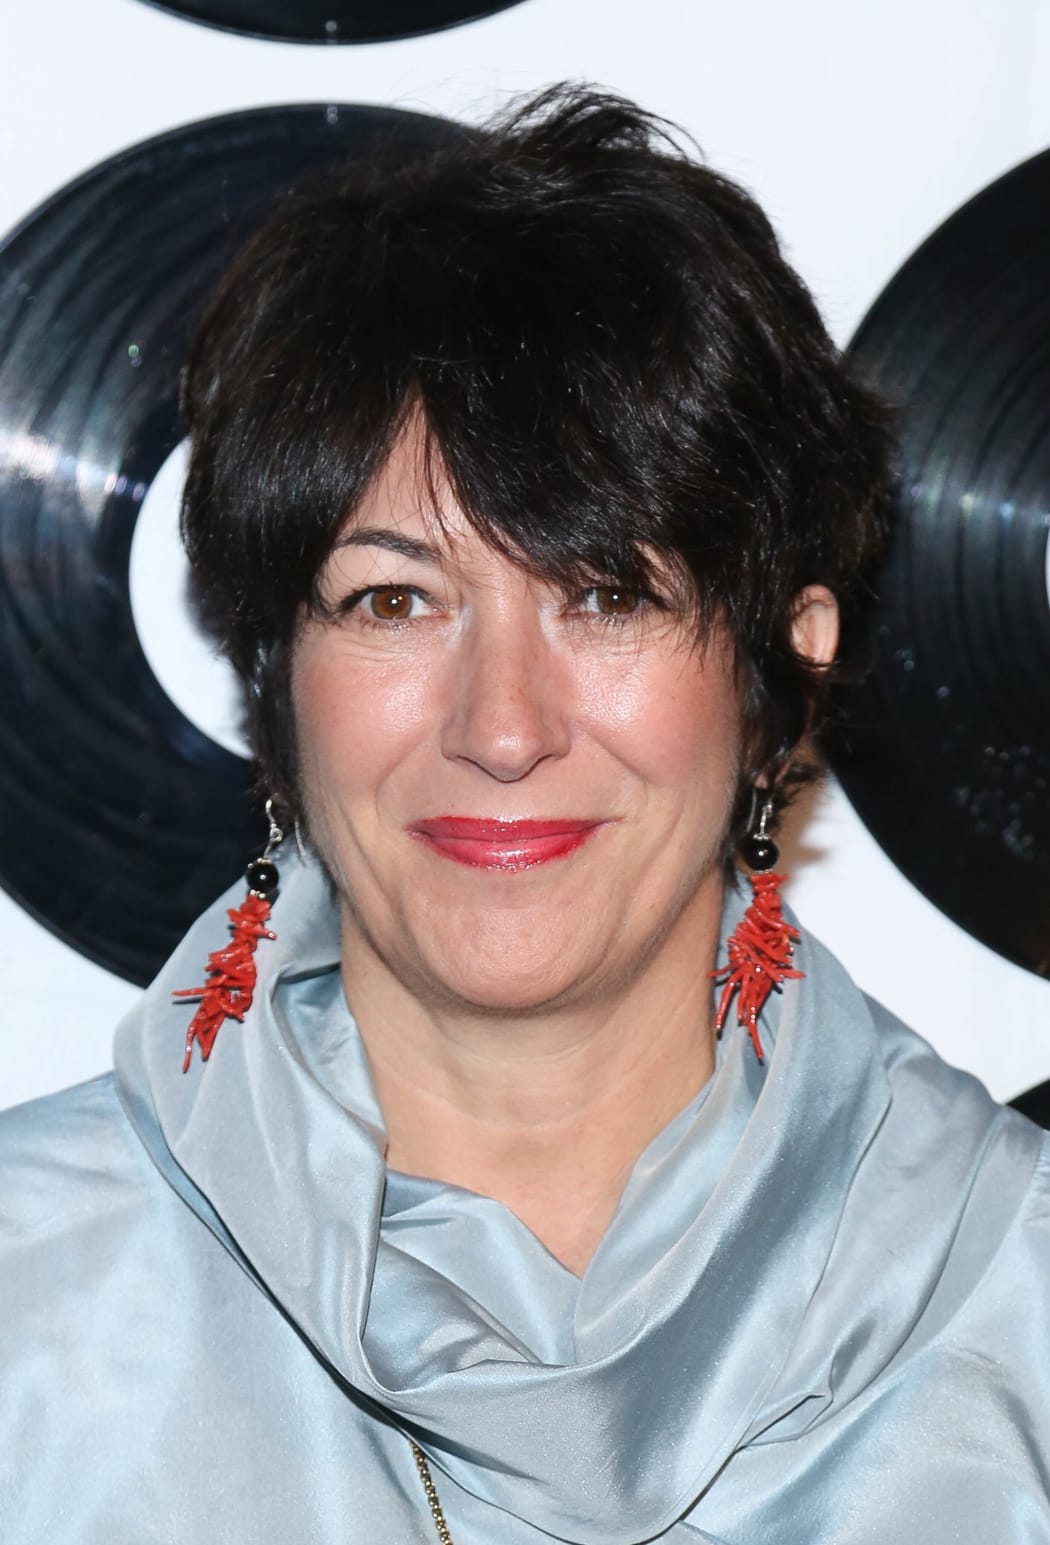 Ghislaine Maxwell attends the 2014 ETM (EDUCATION THROUGH MUSIC) Children's Benefit Gala on May 6 2014 in New York City.